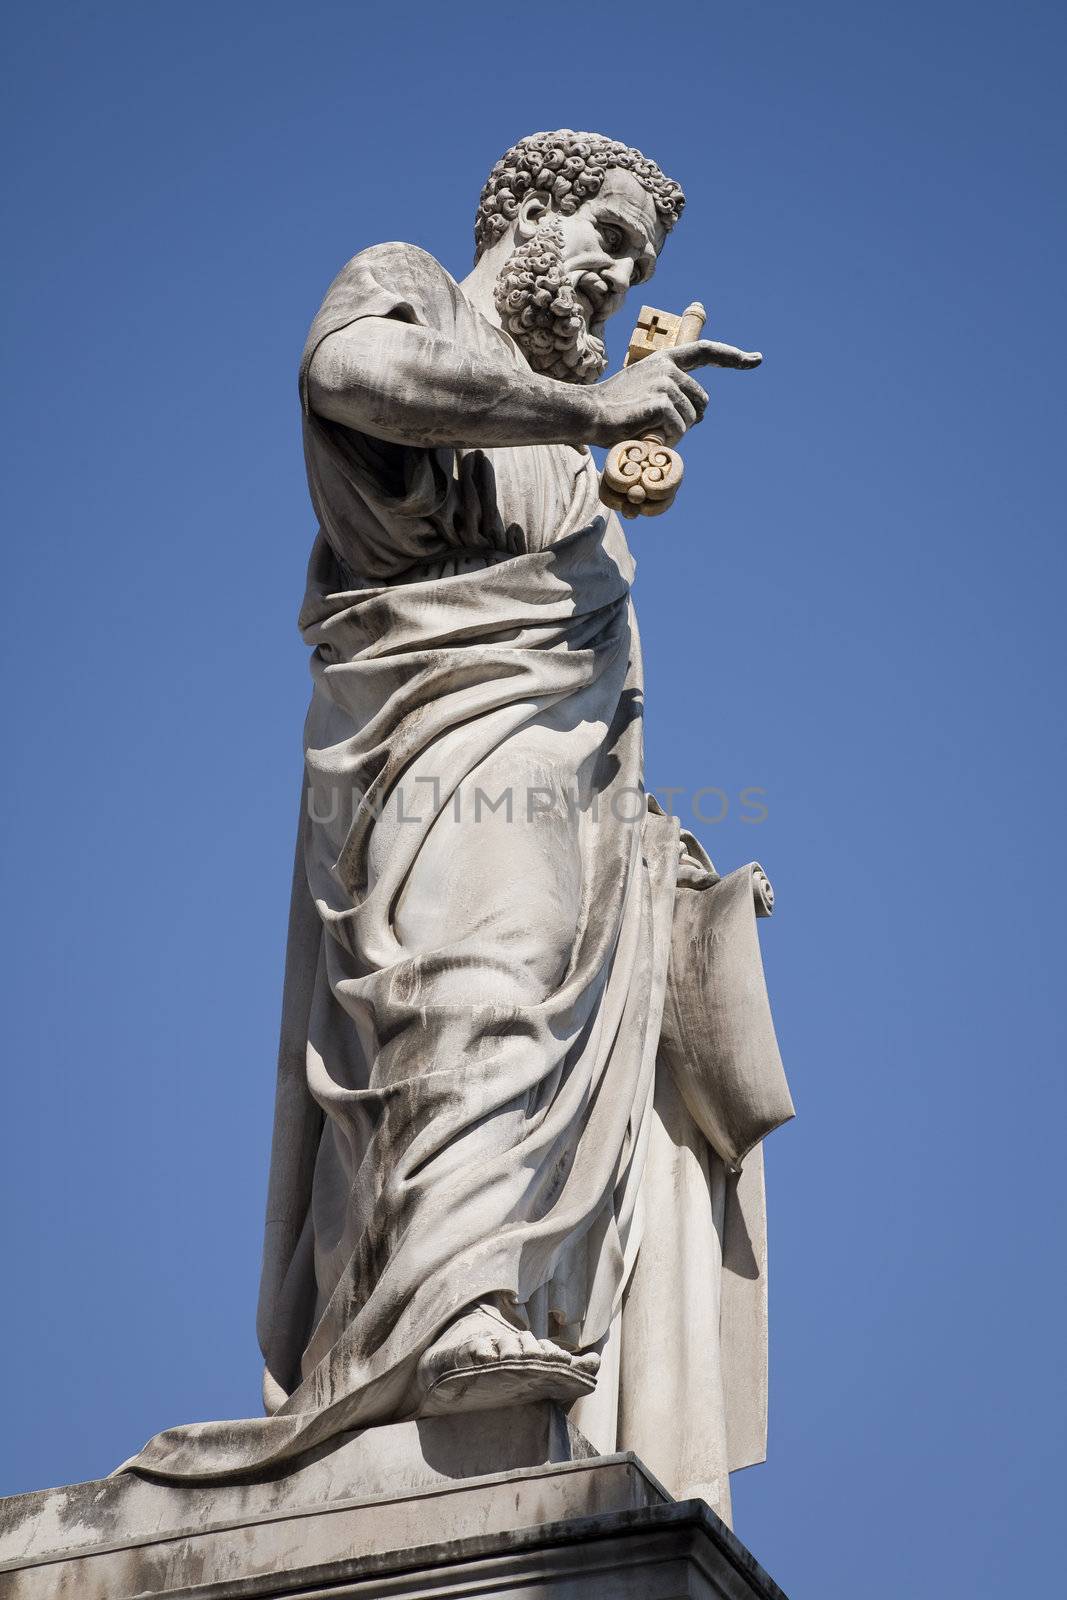 Statue of Saint Peter made by the Venetian sculptor Giuseppe De Fabris 1840. The key in the right hand is a symbol of power. It can be seen to the left outside the Sant Peters Basilica in Rome.